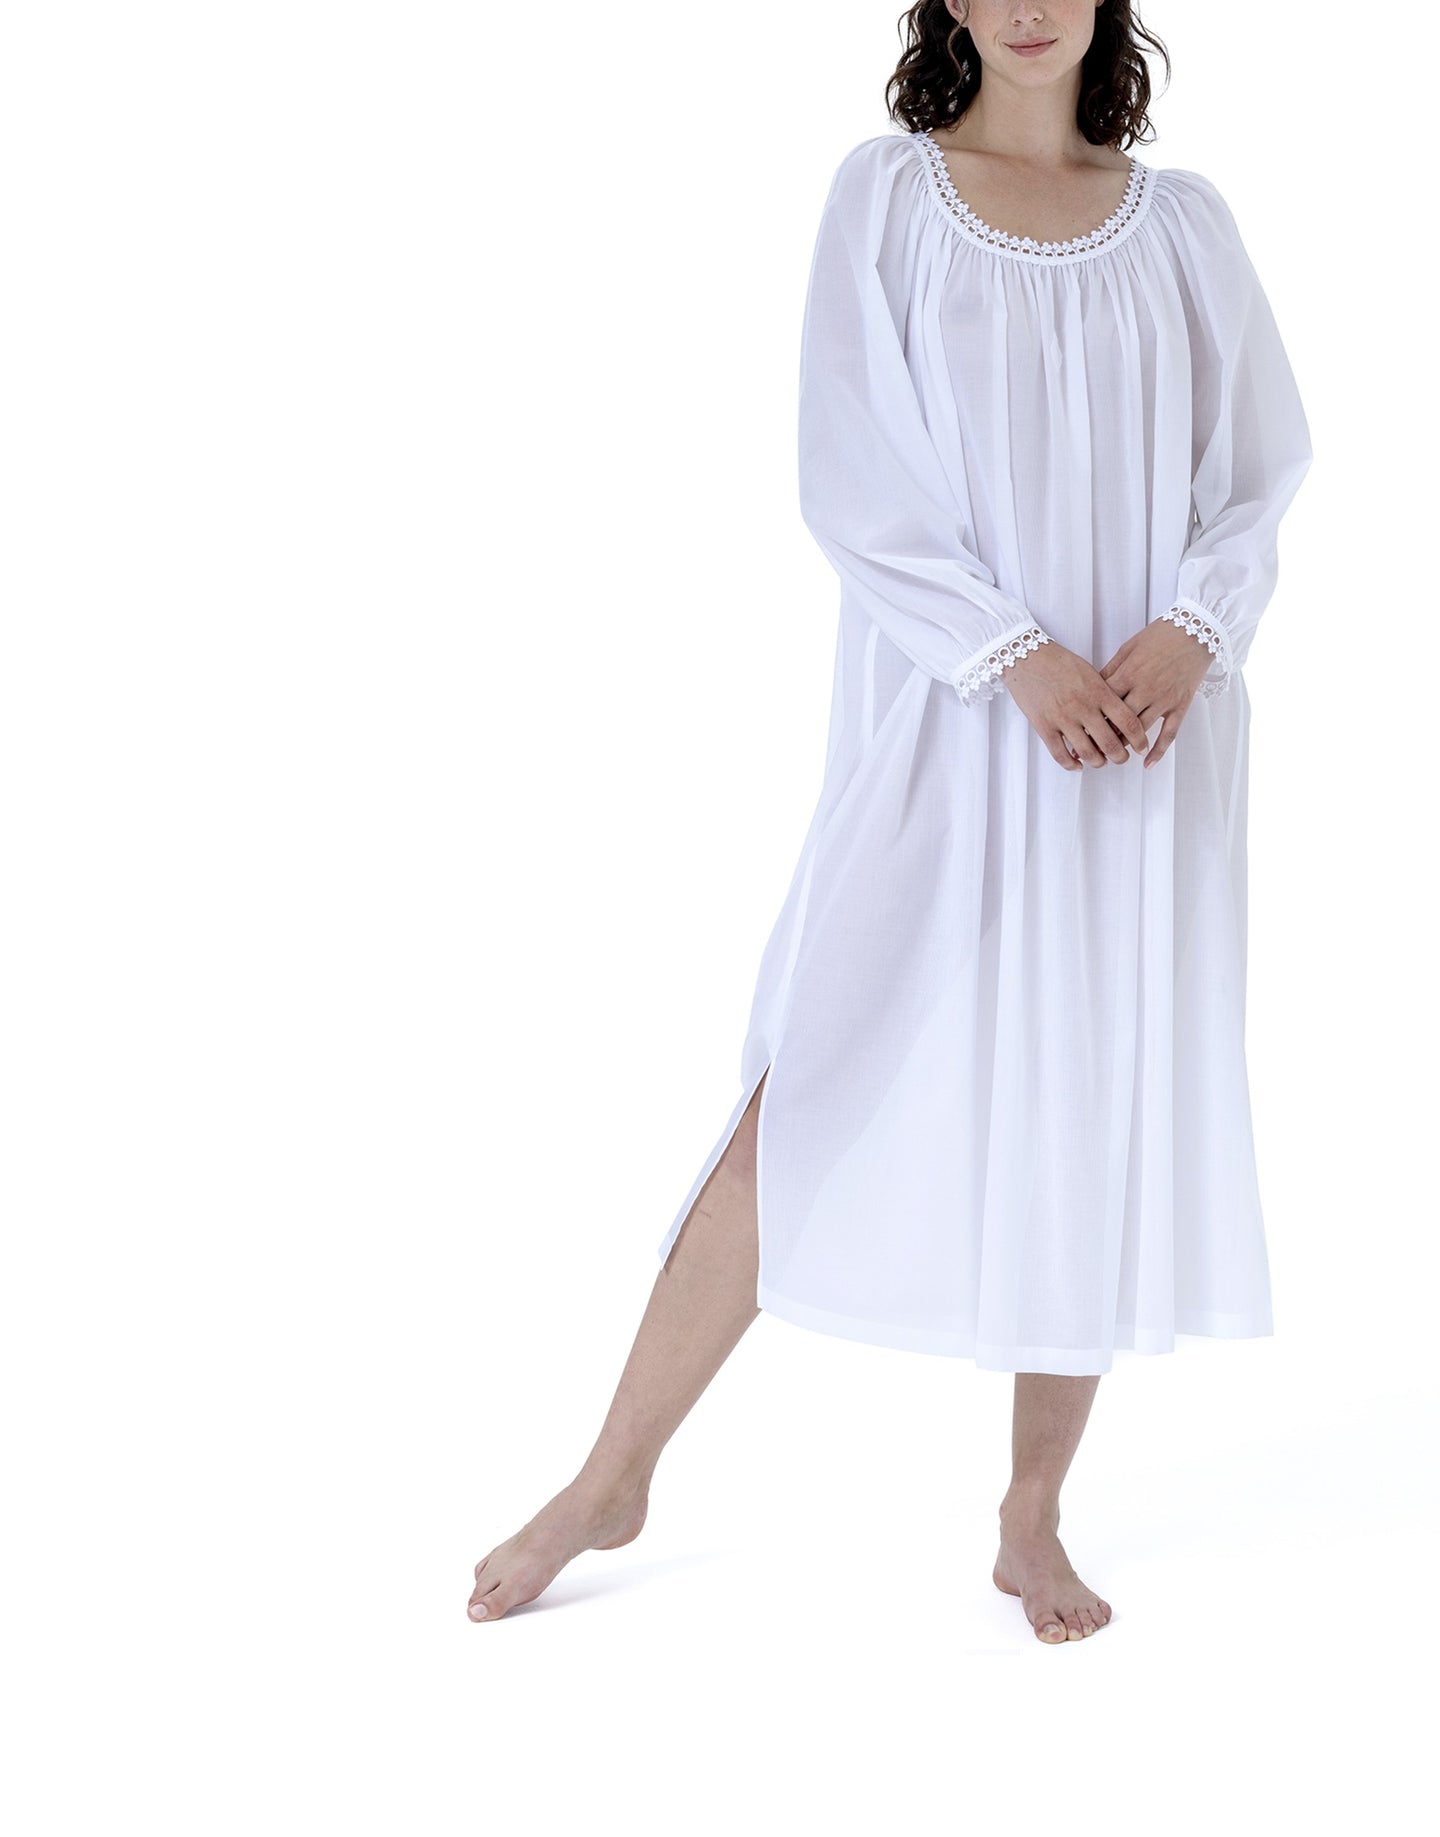 Very beautiful long (124cm) long sleeve nightgown. Lace detail on the gently rounded neckline and the cuff hem. Flared skirt with a side slit for ease of movement when sleeping. Made in Germany from the finest pure Swiss cotton, Celestine nightdresses are diaphanous, offering perfect sleep without heaviness. Fabric composition: 100% Pure Swiss Cotton. 100% Guipure Cotton Lace. Machine Washable.